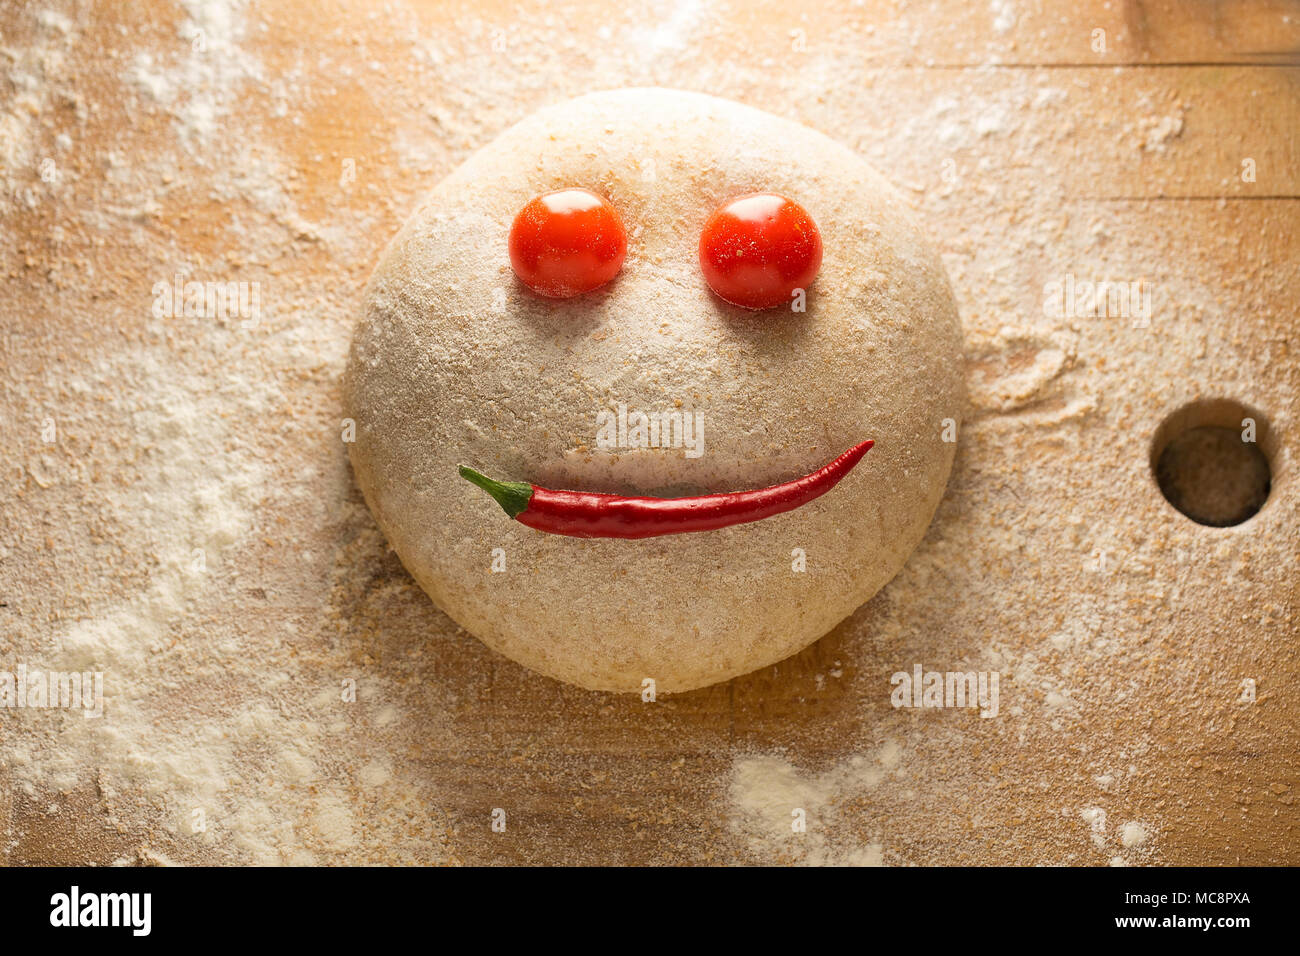 ball of dough shaped as a happy face, on a wooden surface,, with tomatoes and red pepper on it . Stock Photo